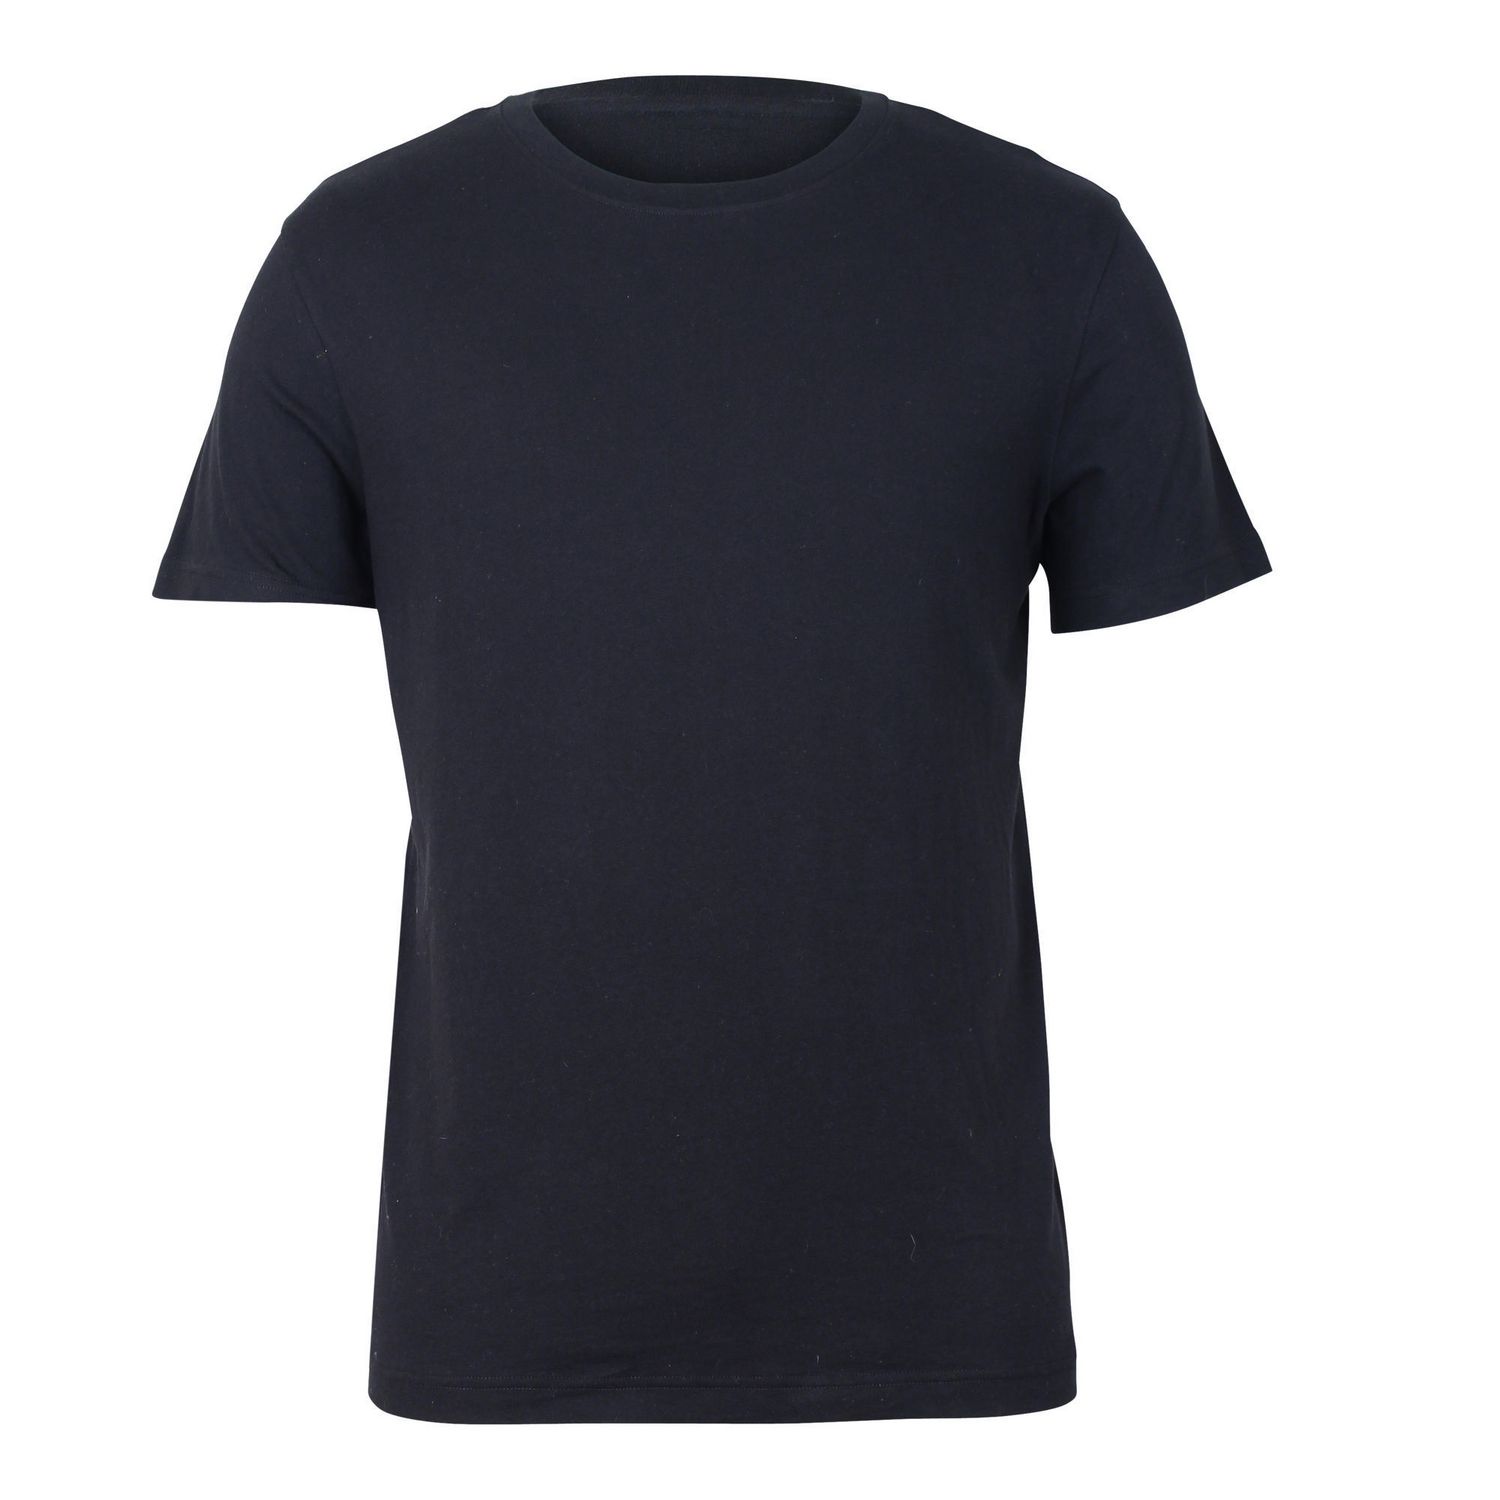 George Men's Two-Pack T-Shirt | Walmart Canada